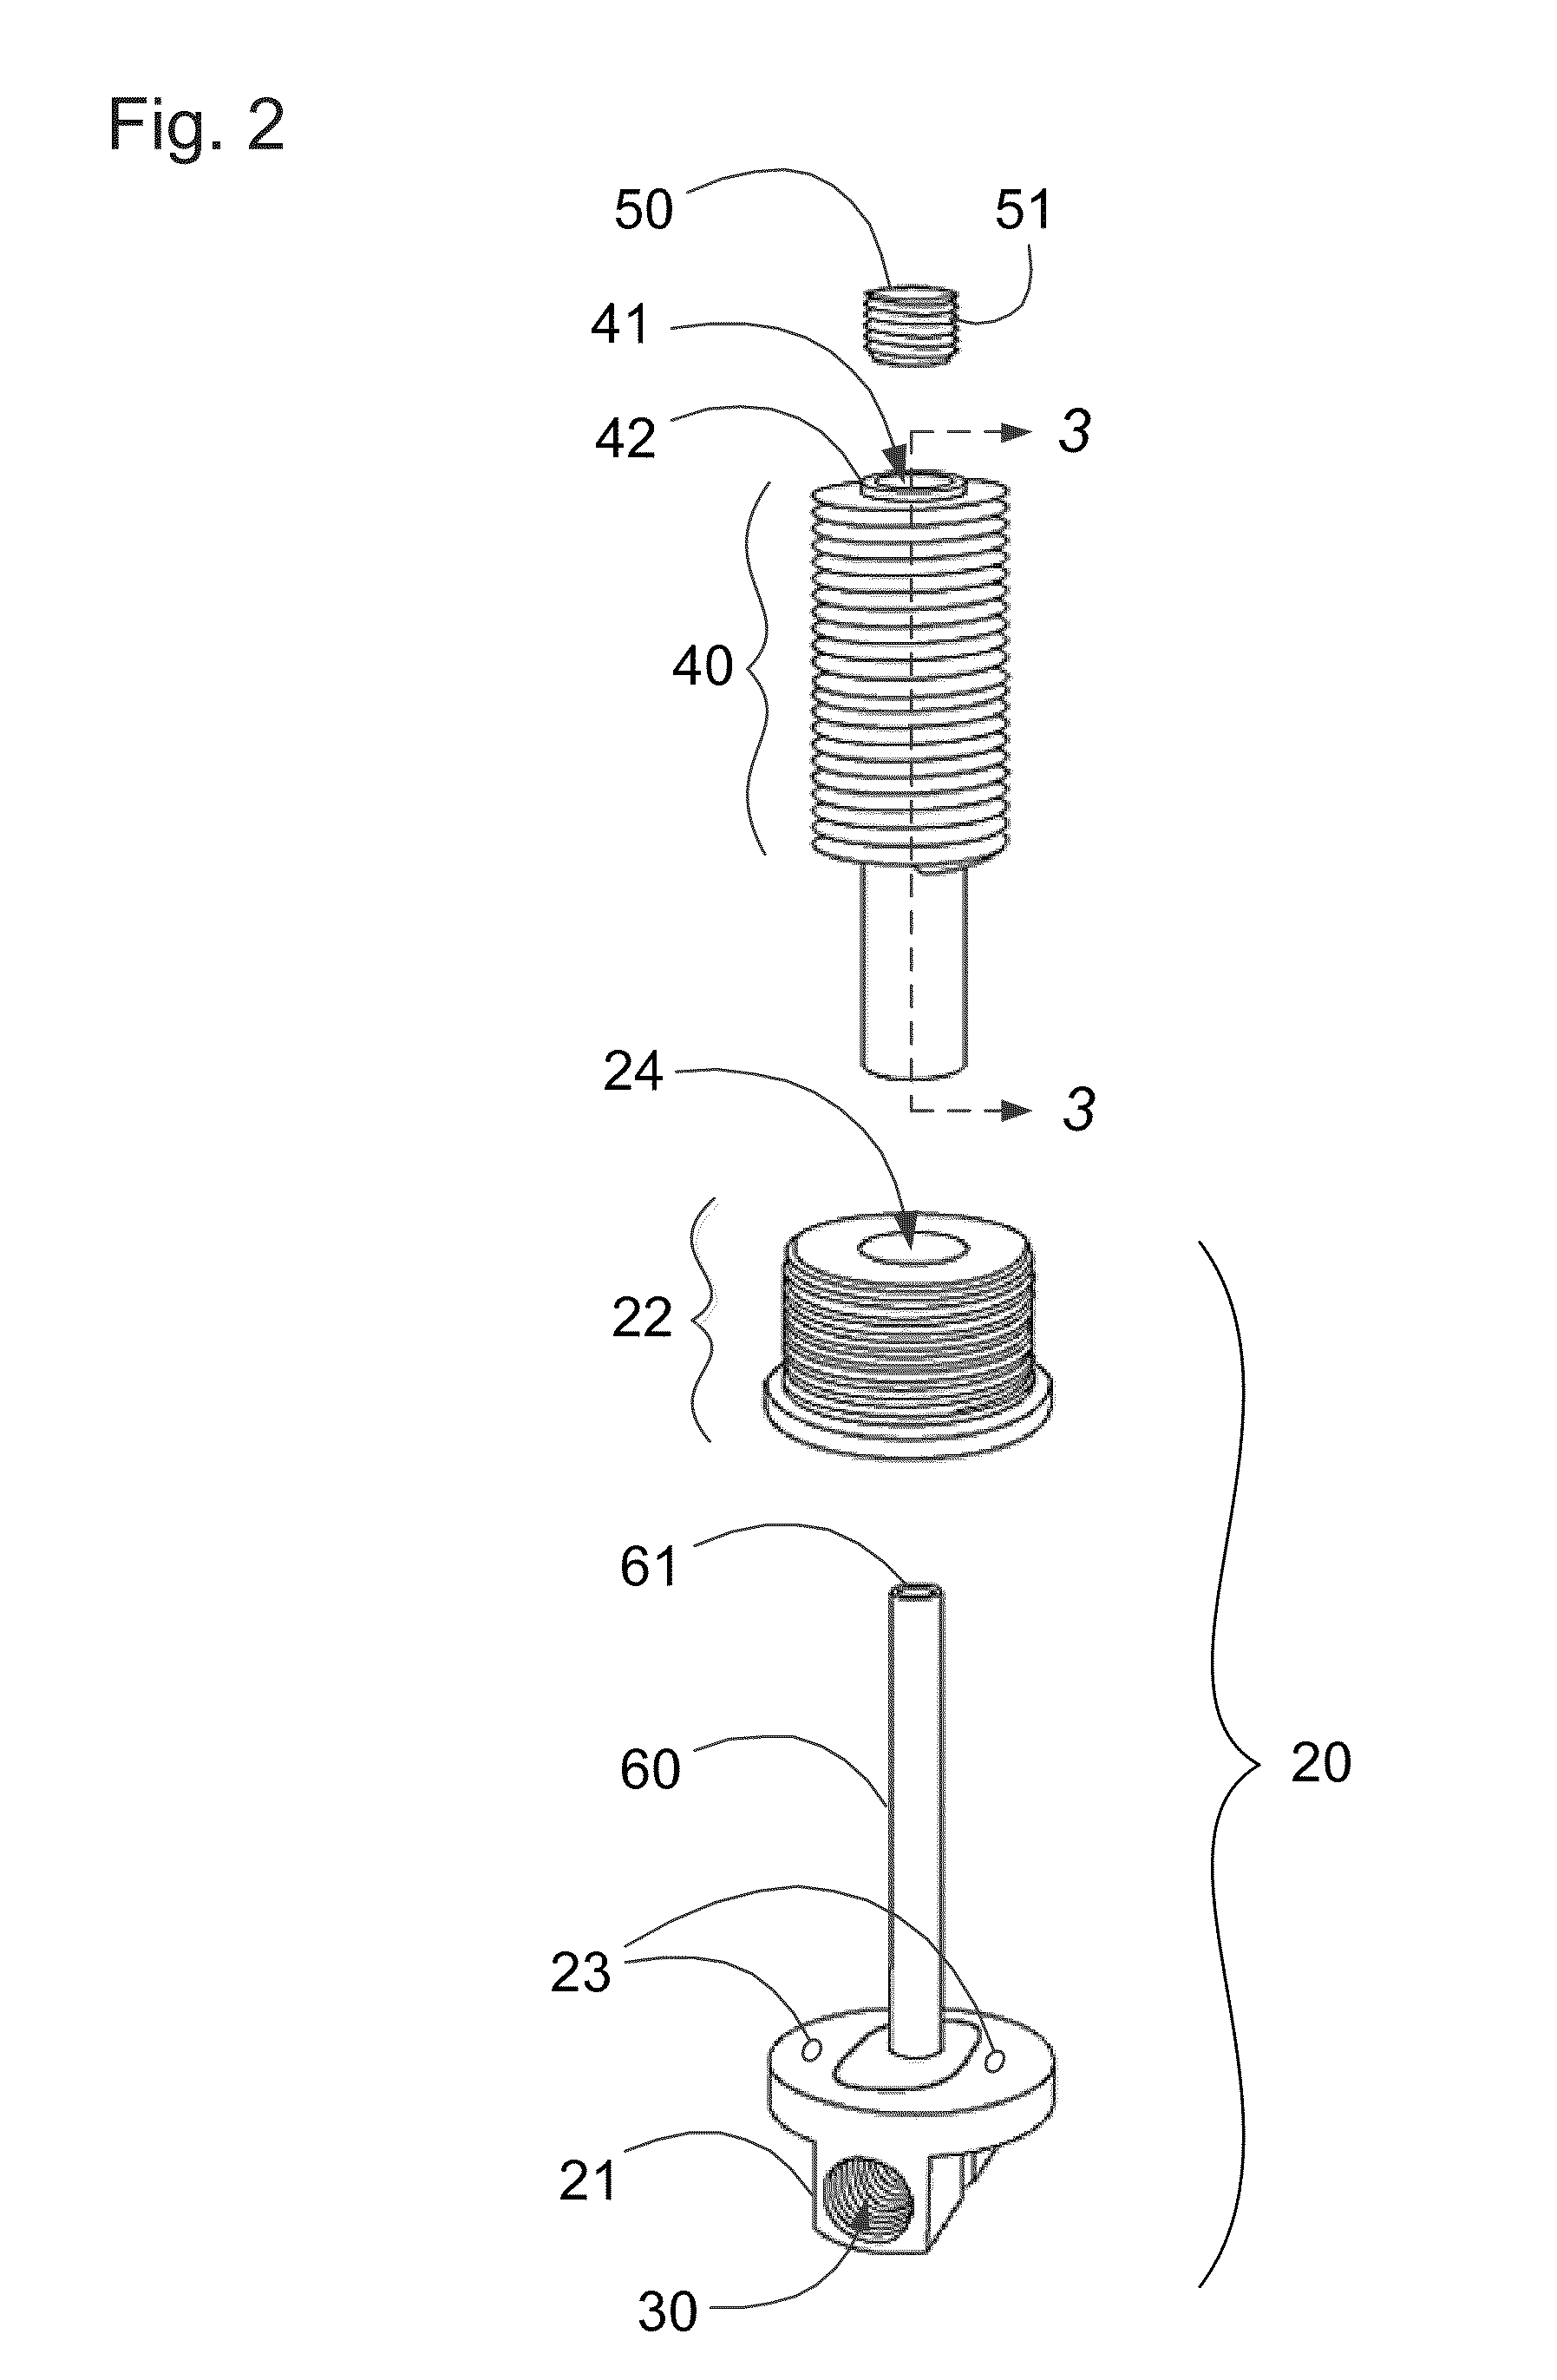 Heat-exchange apparatus for insertion into a storage tank, and mounting components therefor